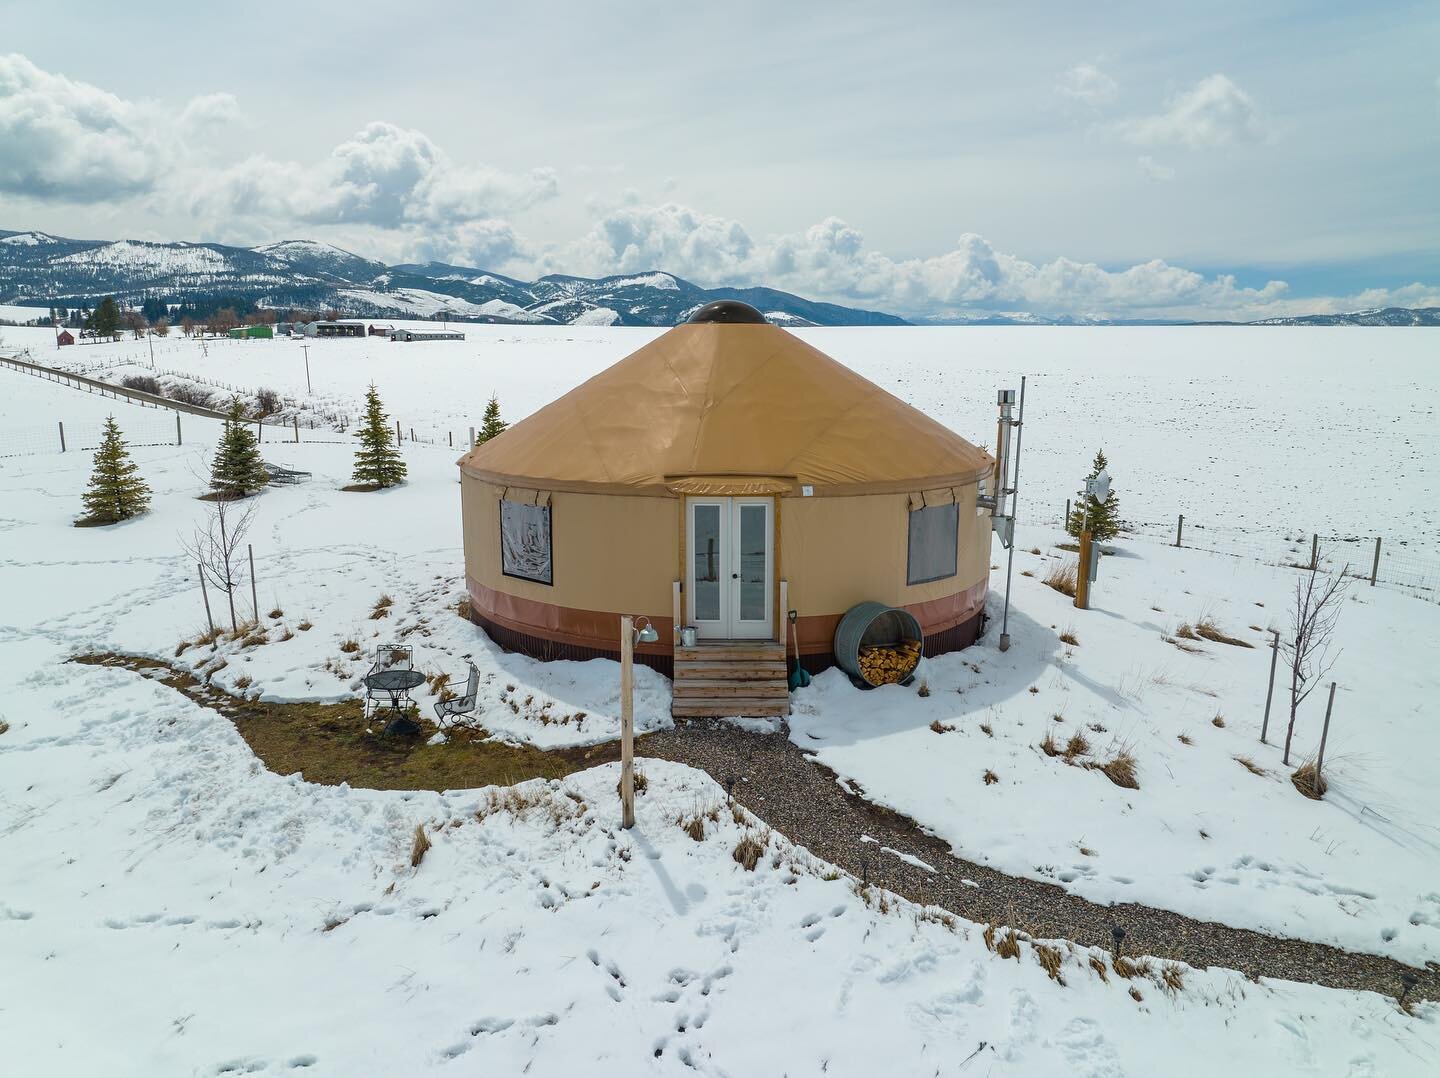 How about a warm and cozy yurt for those cold and windy Montana days? What a fun listing by @yellowstone_brokers. 

#sold #yurt #latergram #montana #mountains #video #nature #aerialcinematography #realestate #realestatevideography